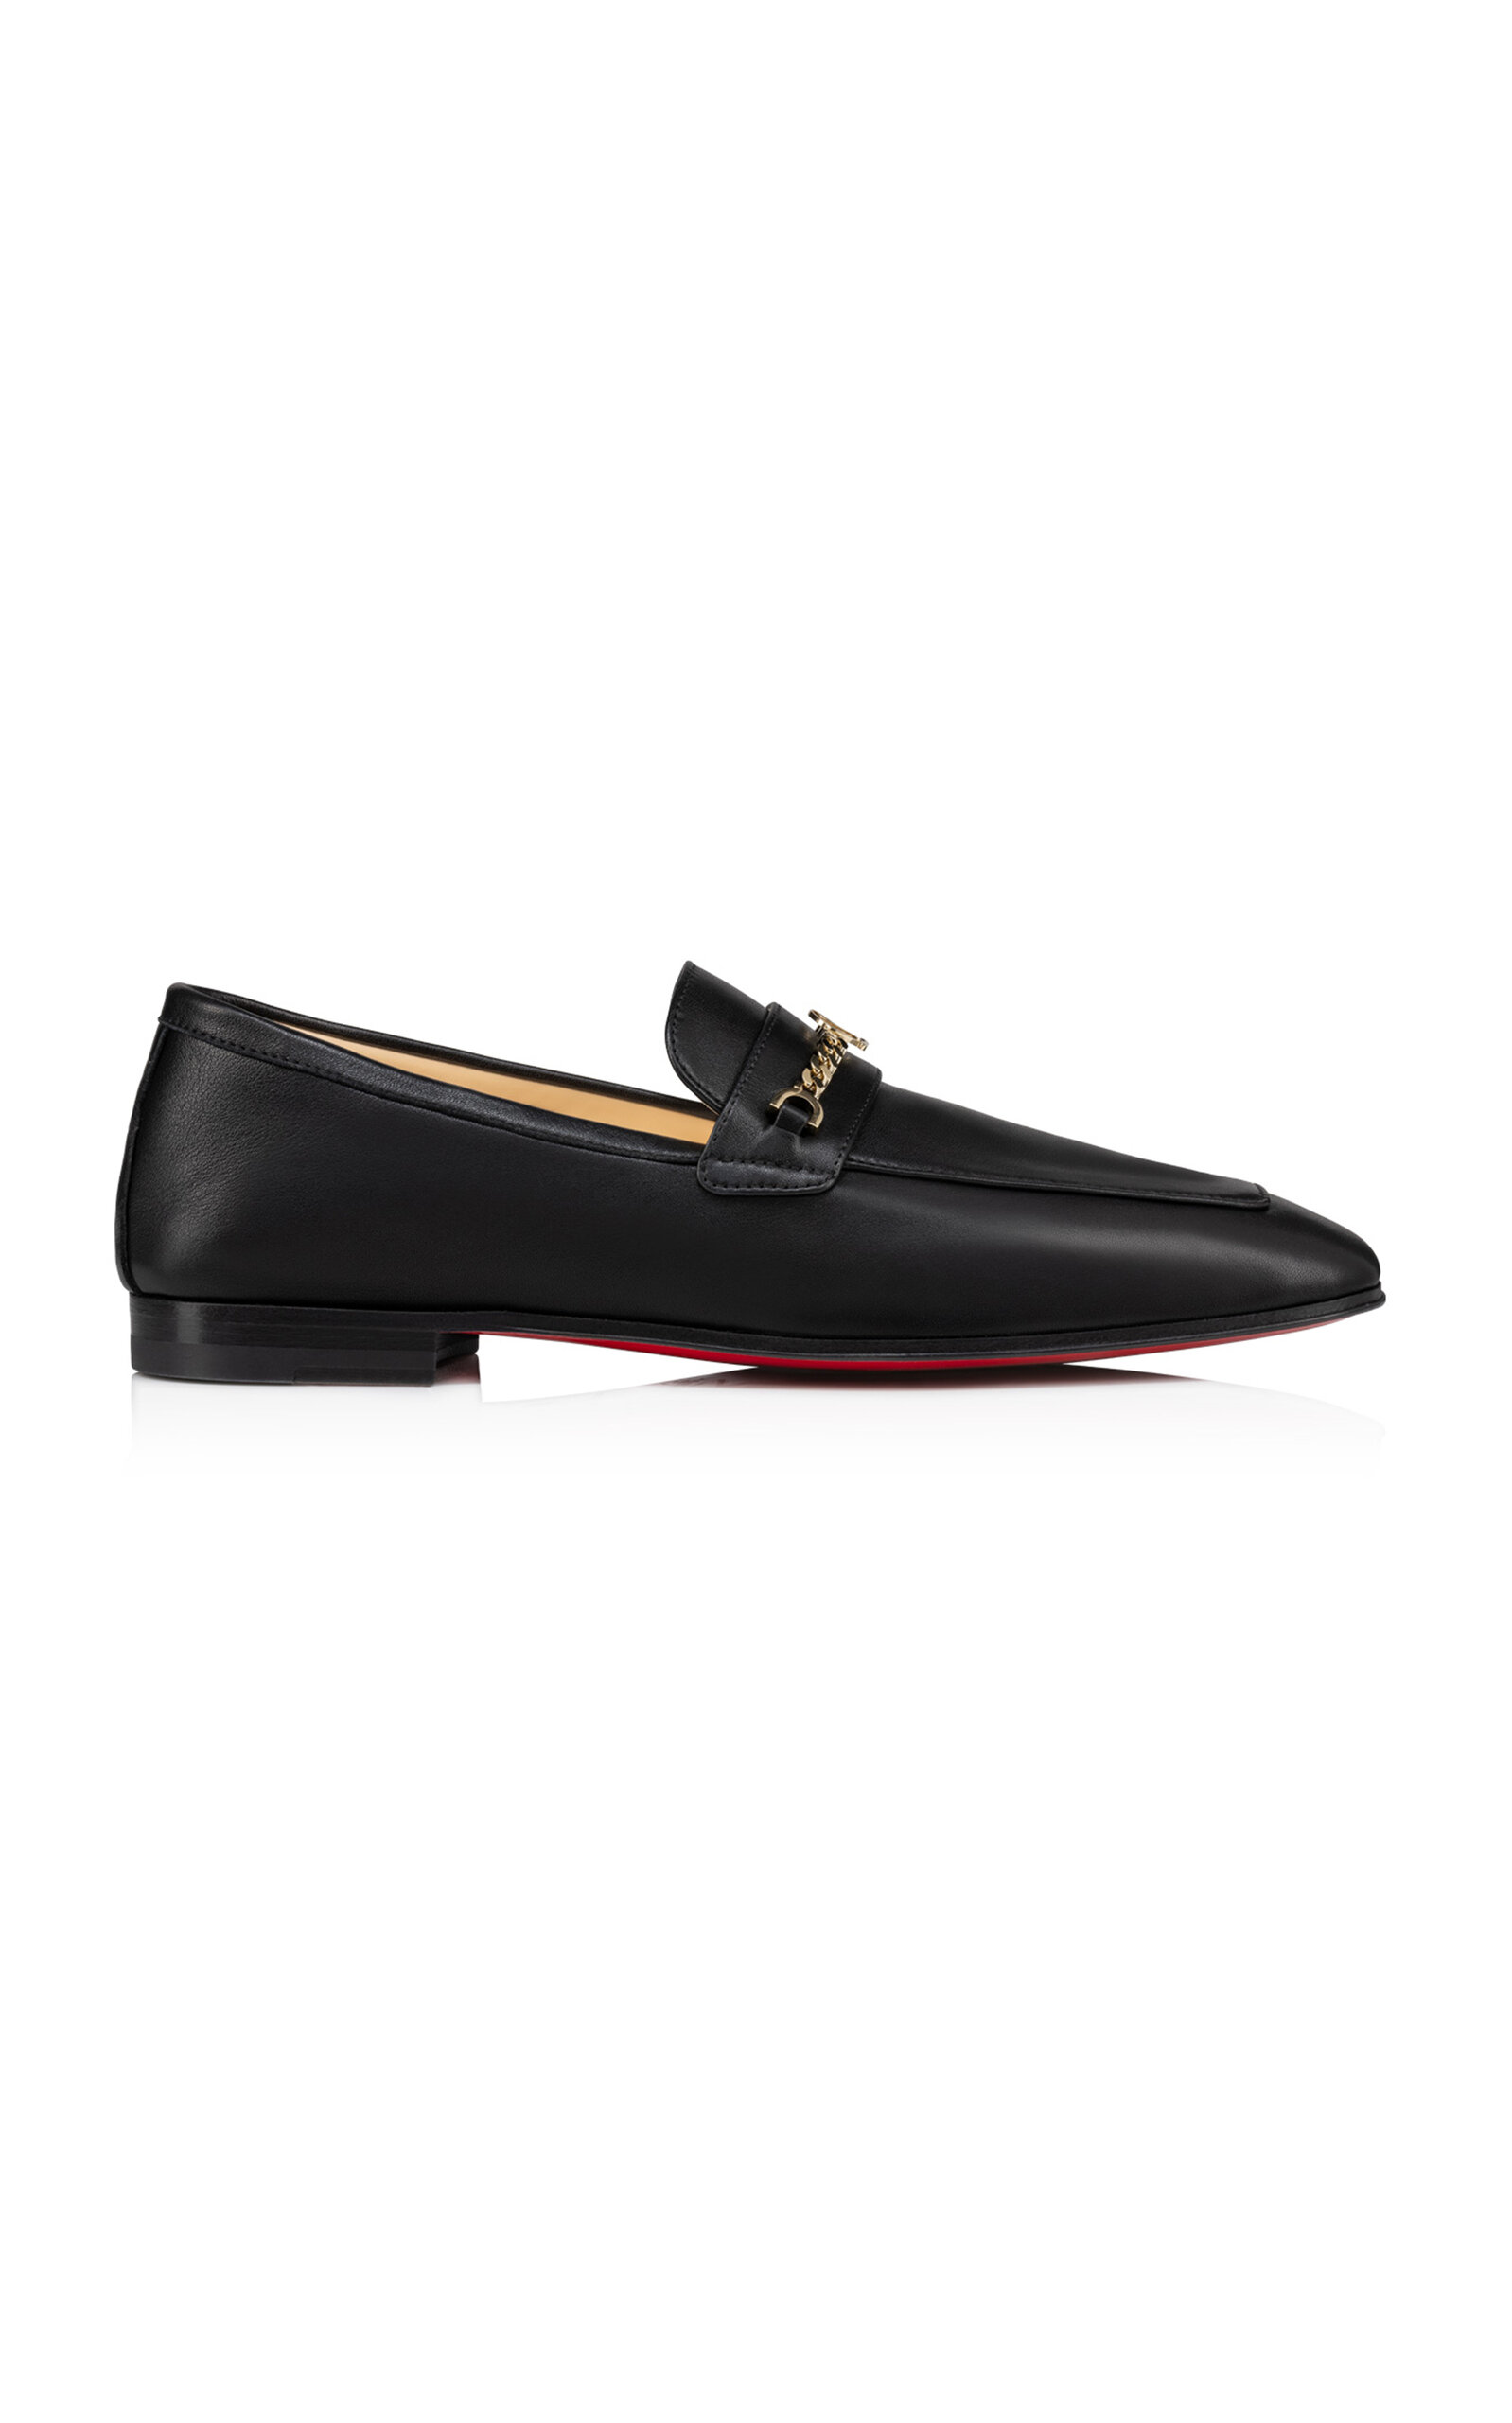 Christian Louboutin LOCK ME ME MOC Turnlock Leather Loafer Flat